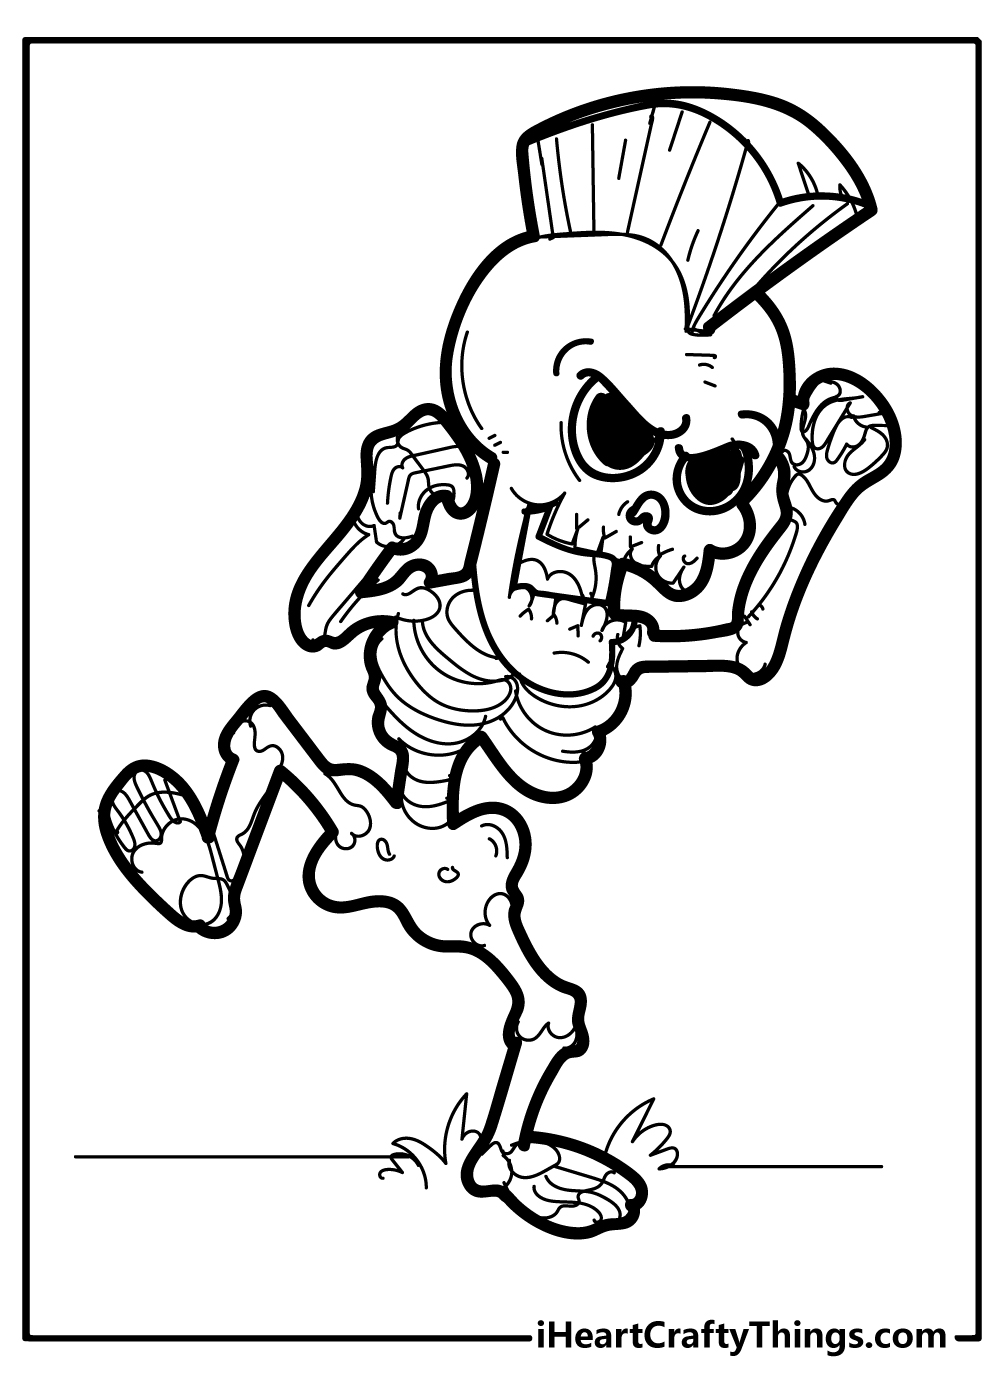 Skeleton coloring pages free printables